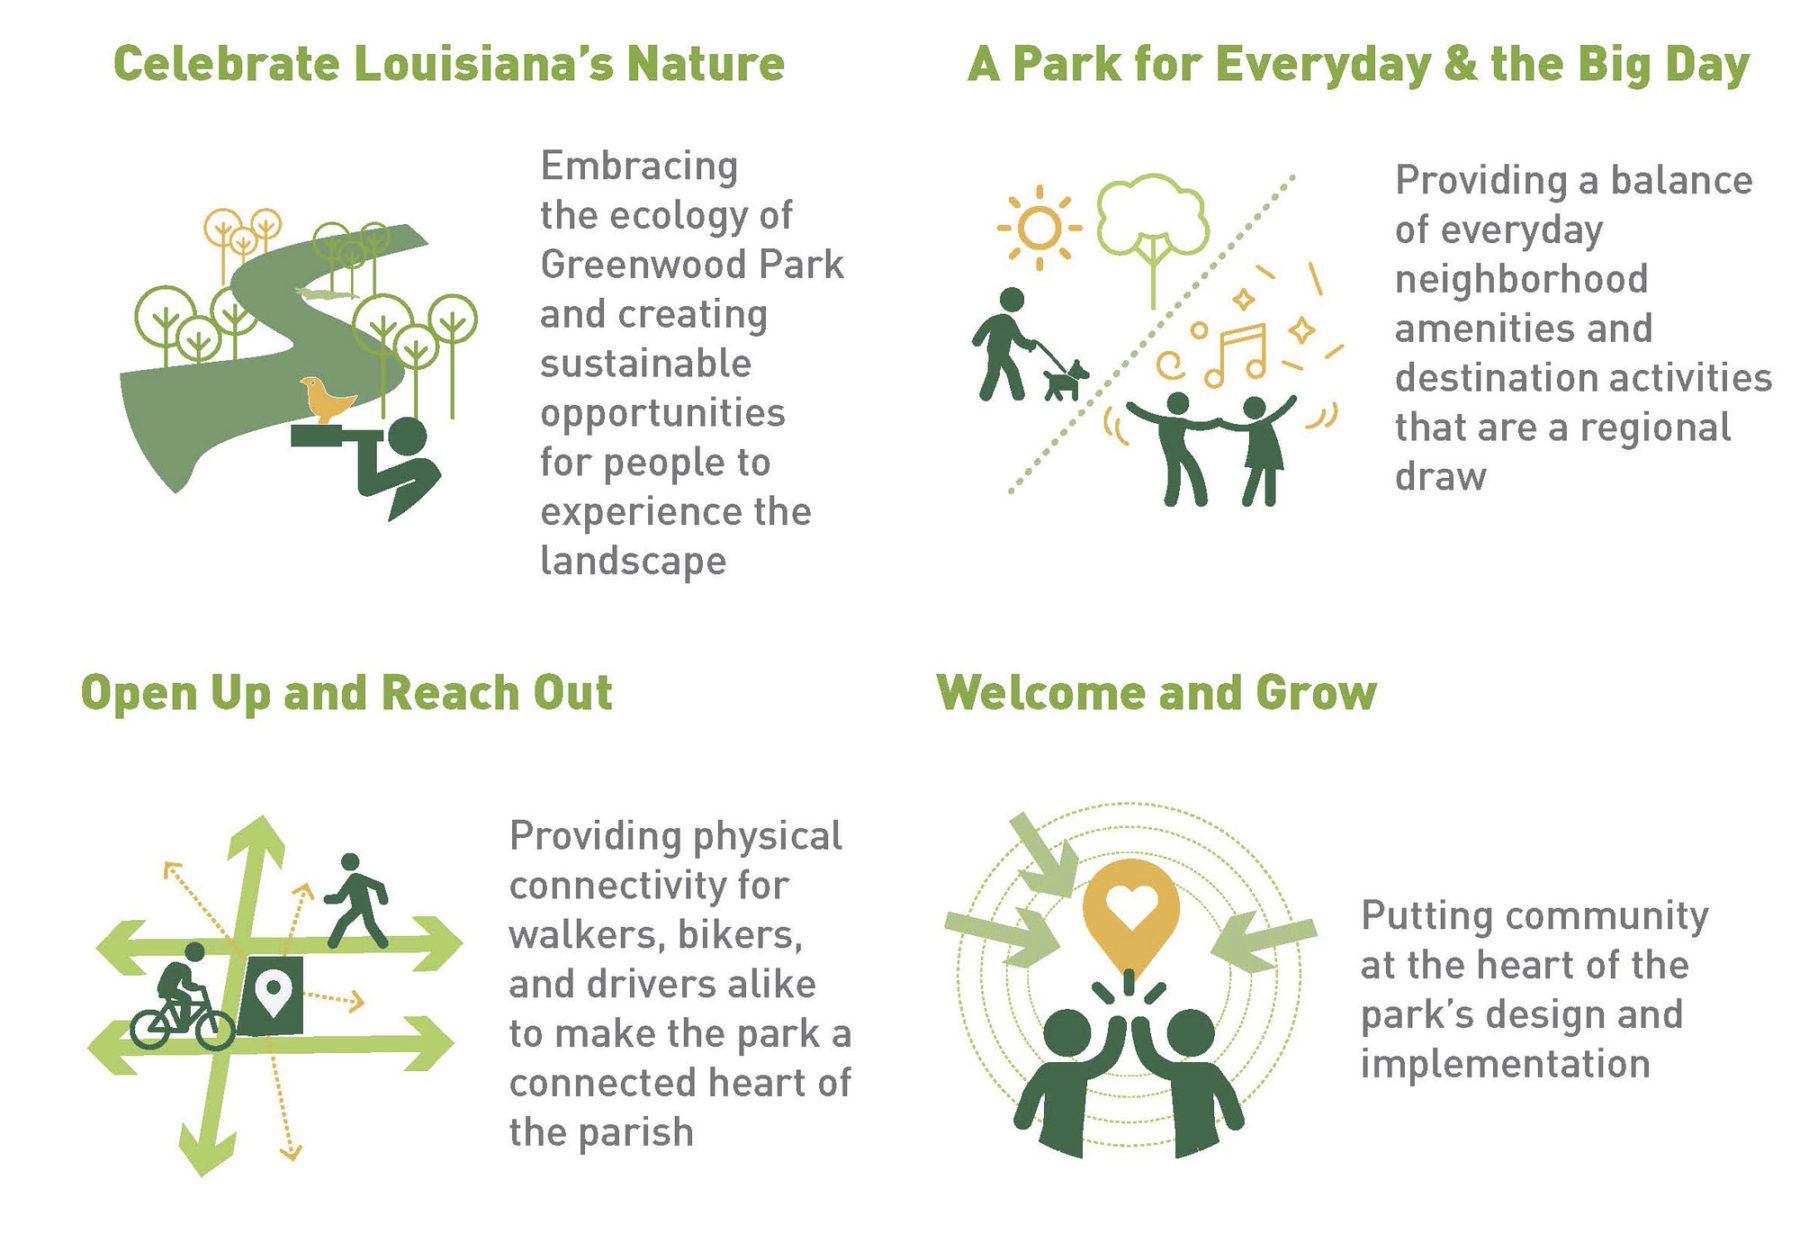 A graphic diagram showing 4 elements of the park